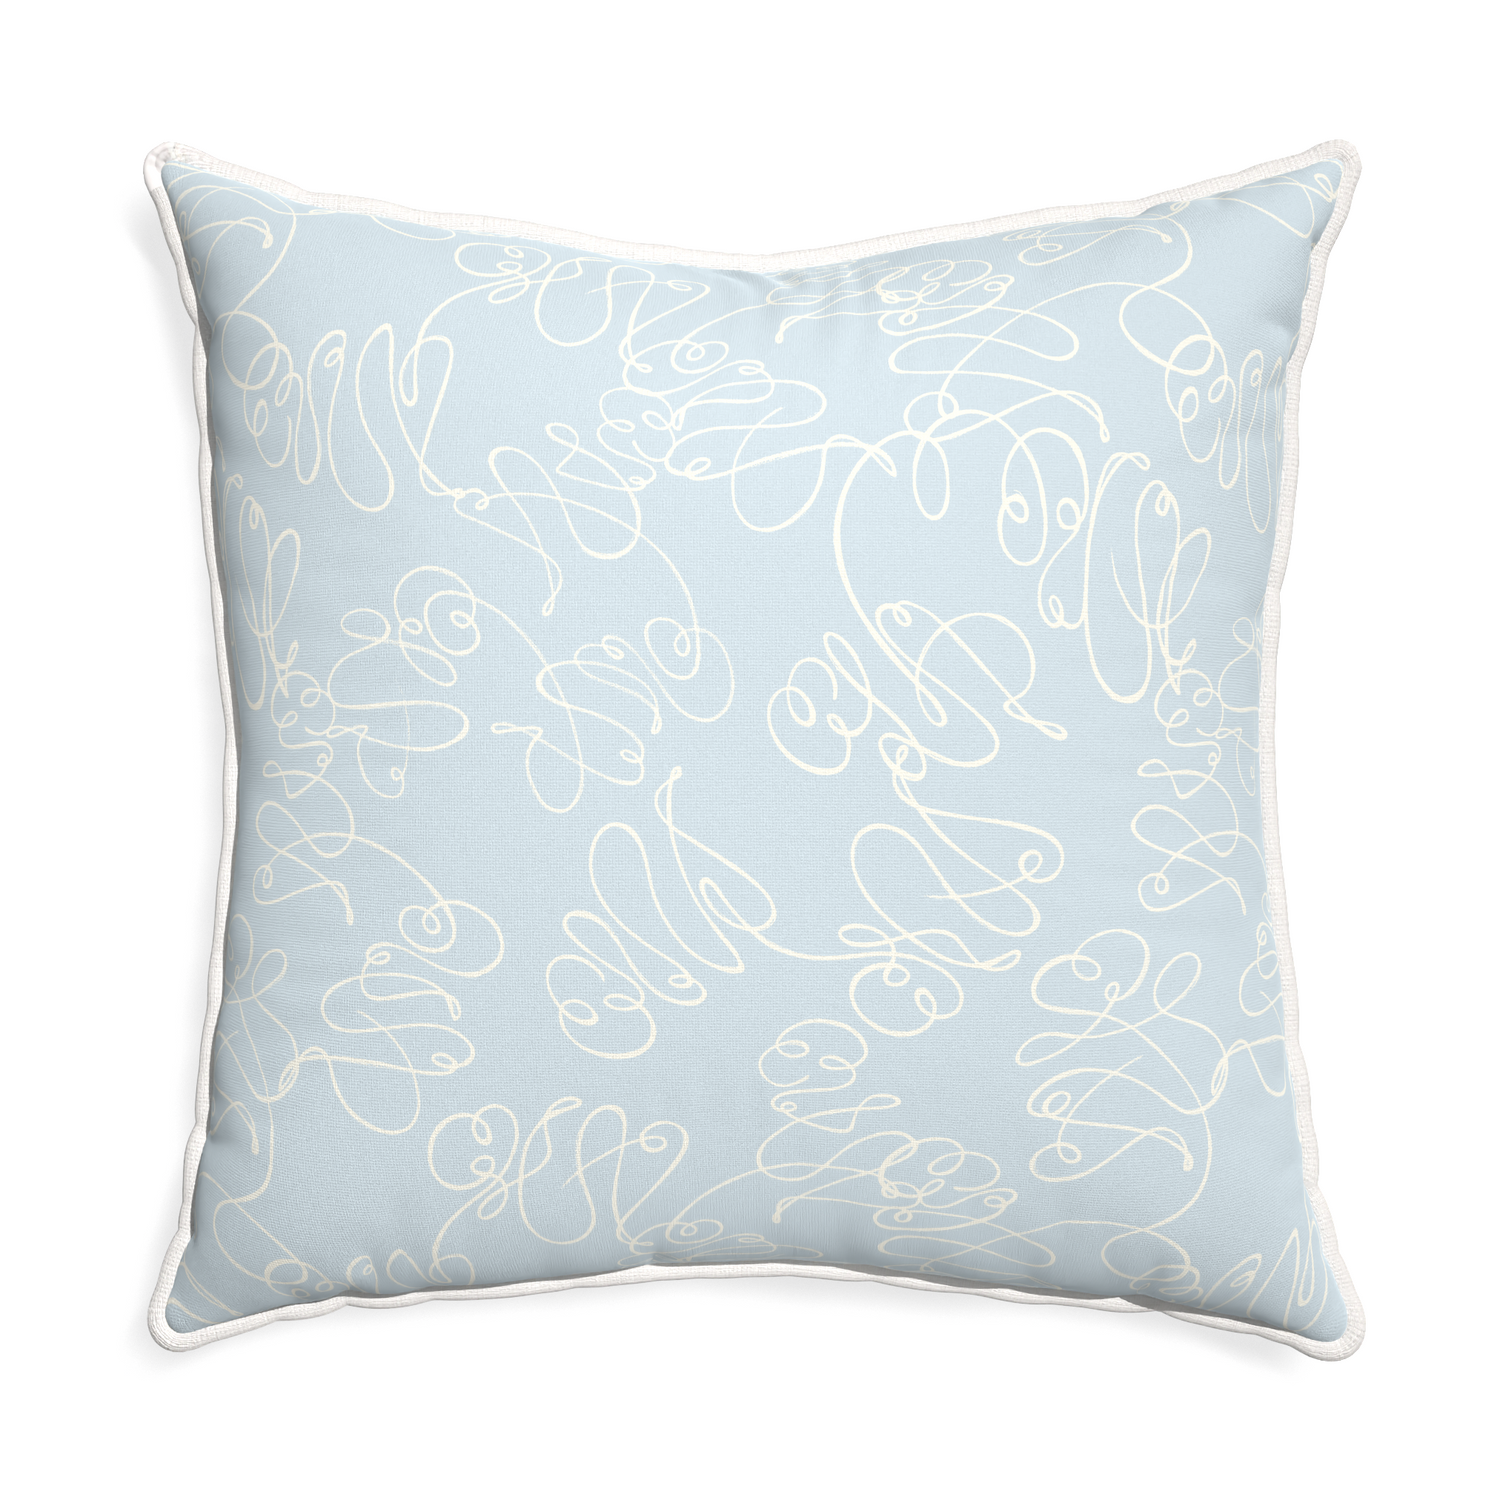 Euro-sham mirabella custom pillow with snow piping on white background